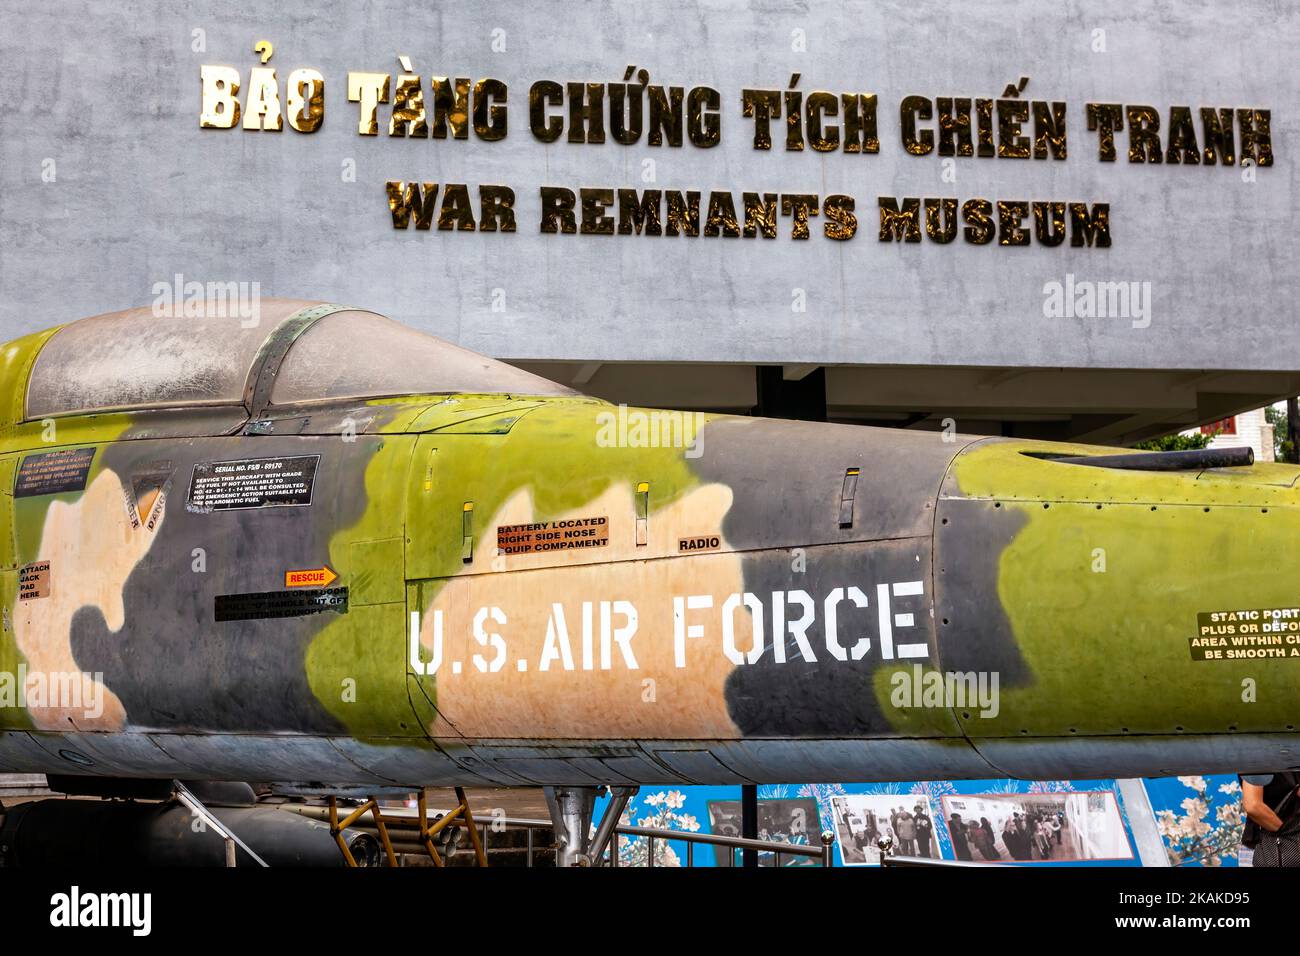 American jet on display at War Remnants Museum, Ho Chi Minh City, Vietnam Stock Photo